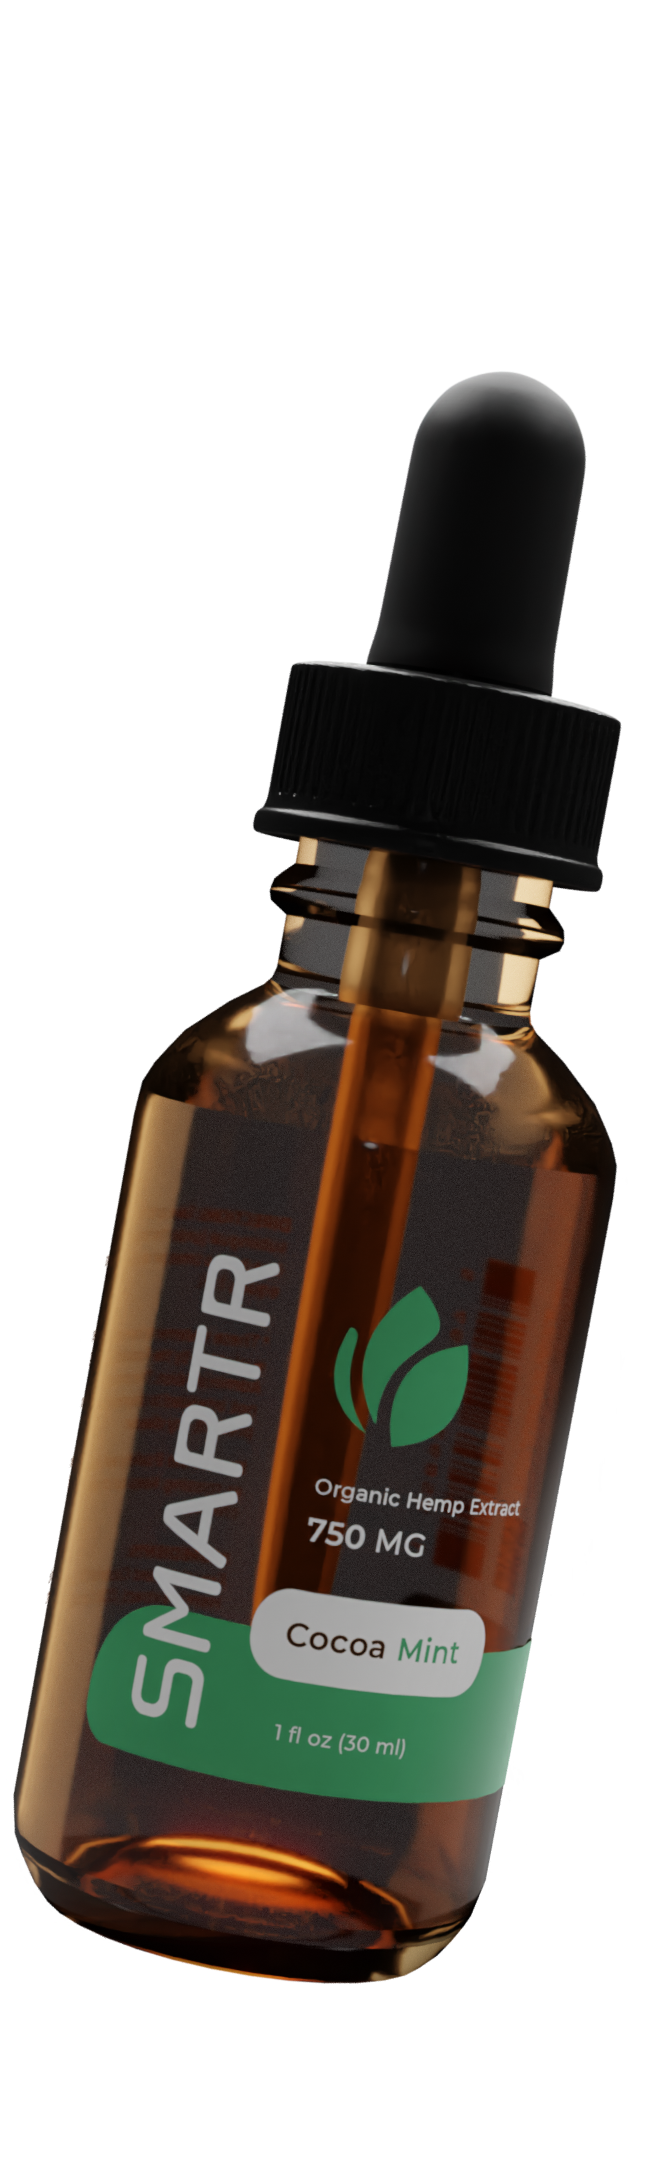 Cocoa Mint hemp oil tincture floating in mid air